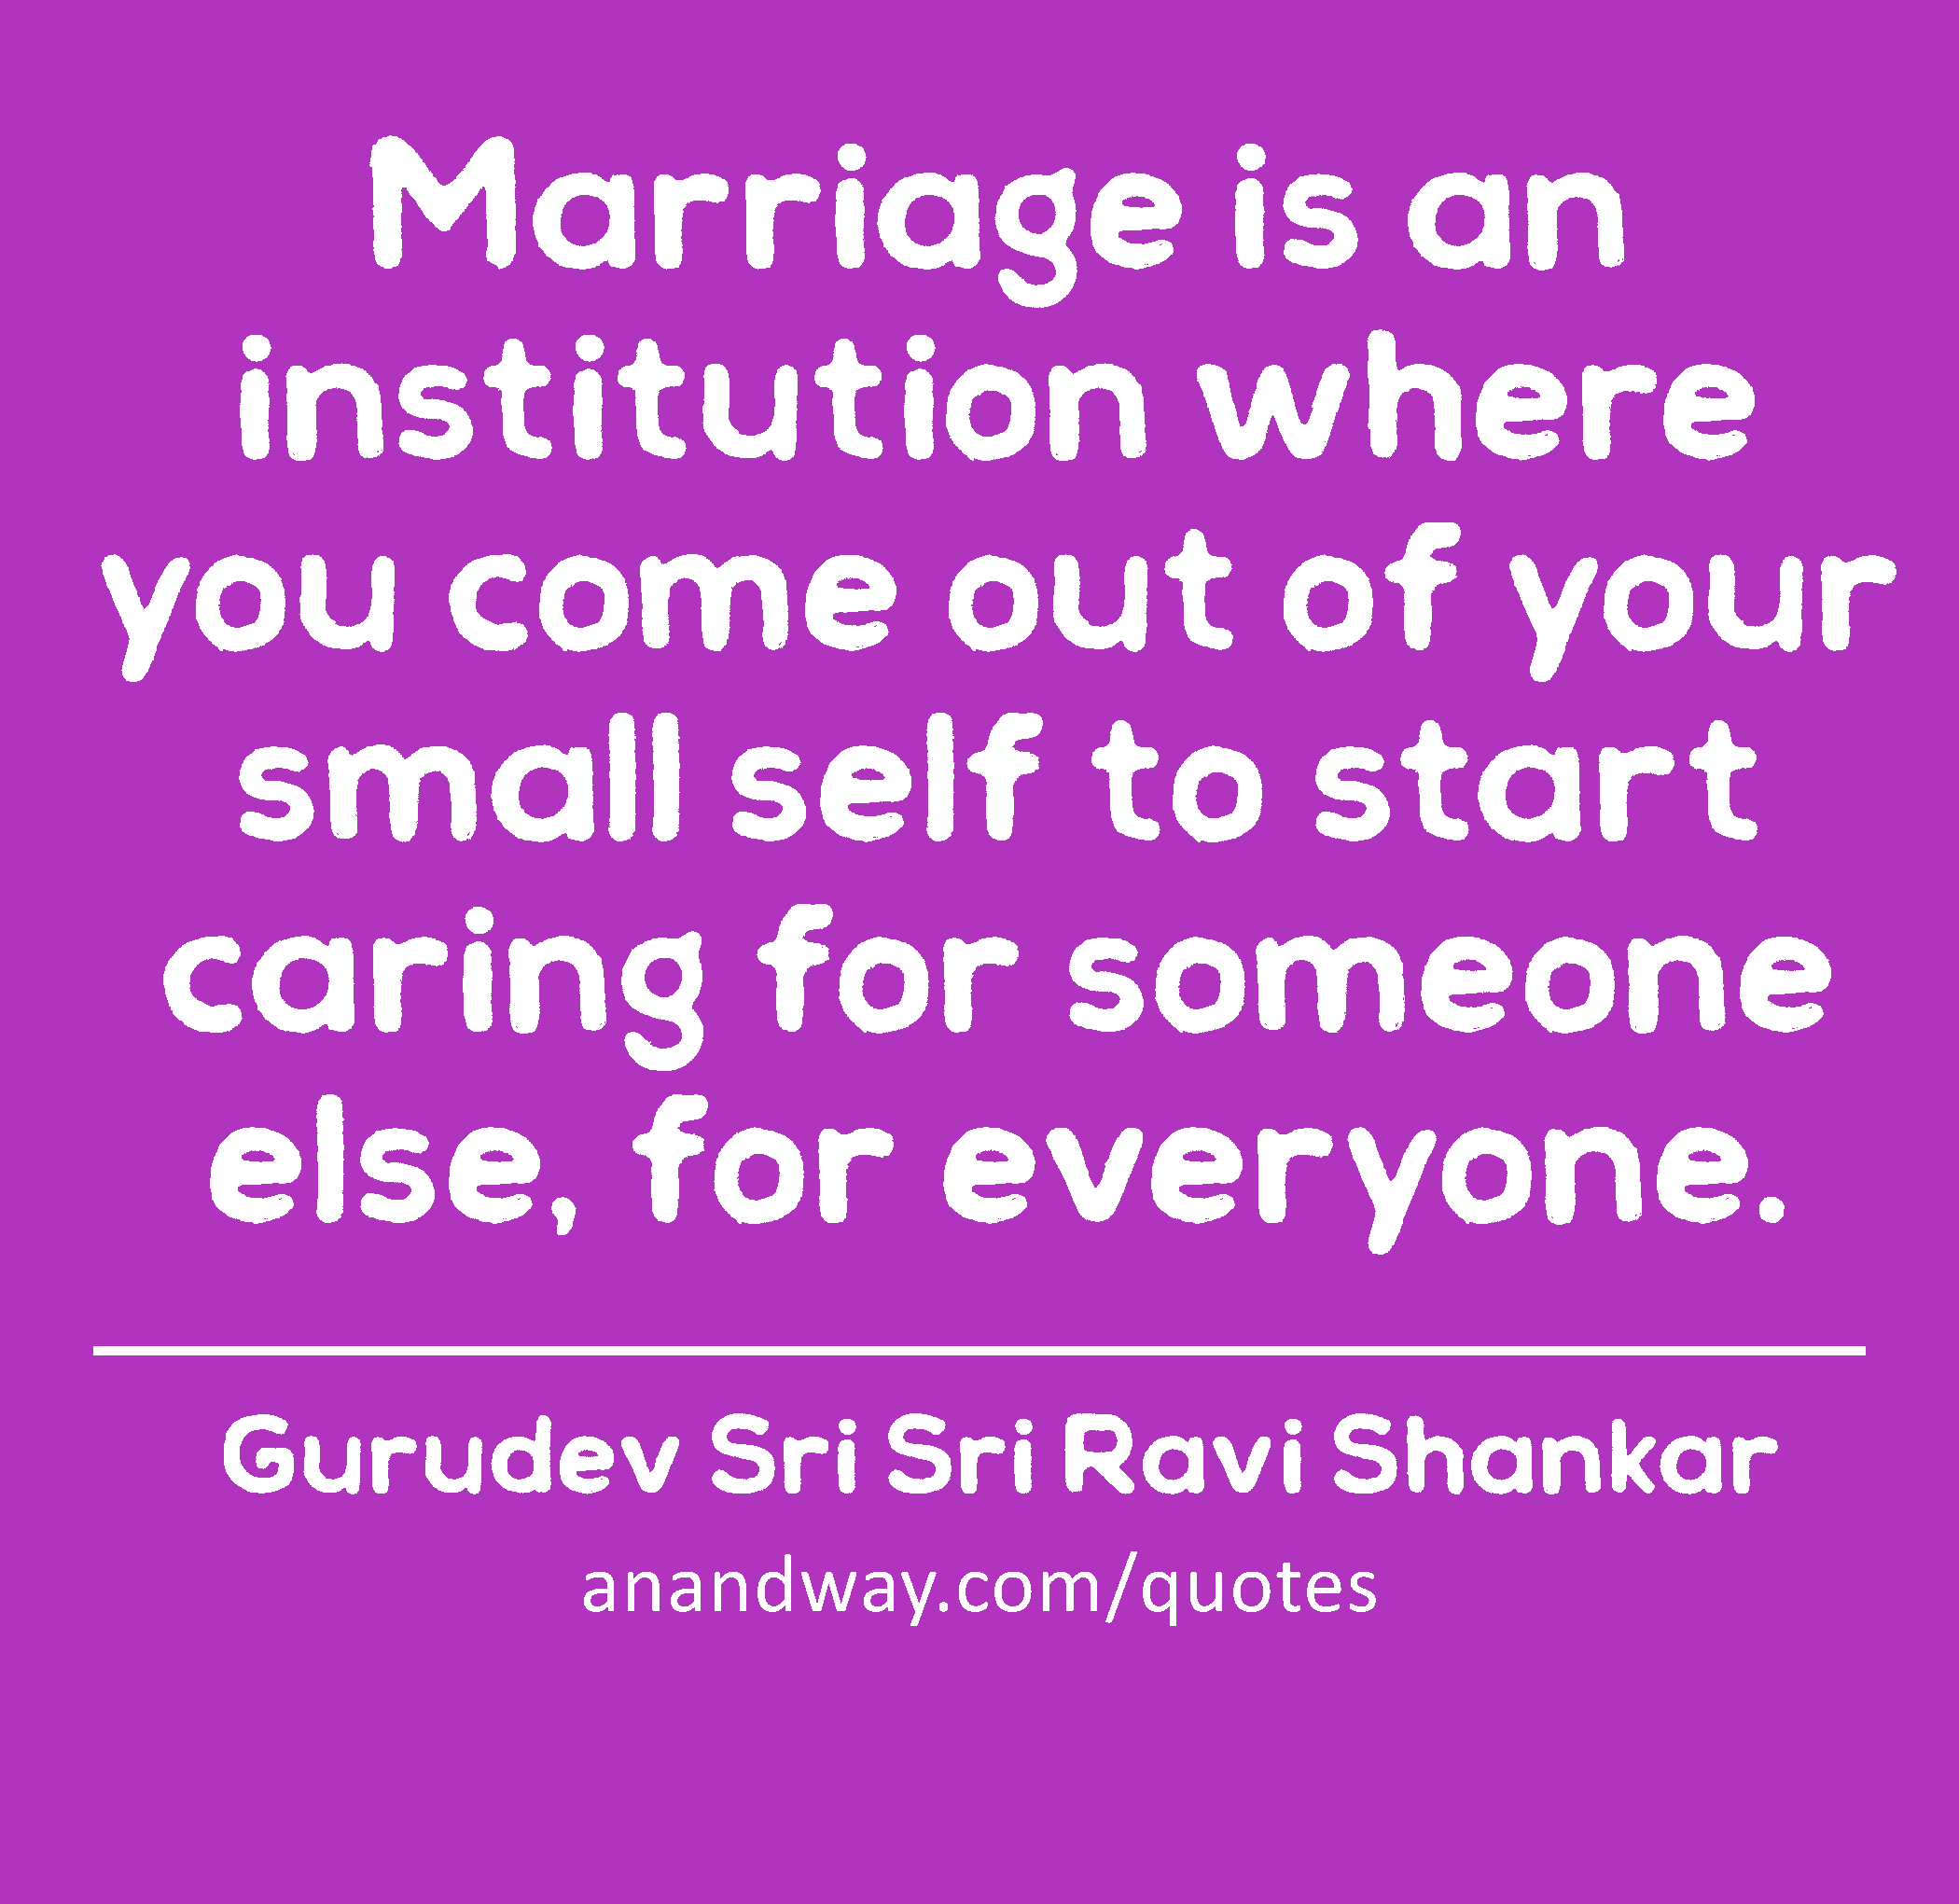 Marriage is an institution where you come out of your small self to start caring for someone else,
 -Gurudev Sri Sri Ravi Shankar